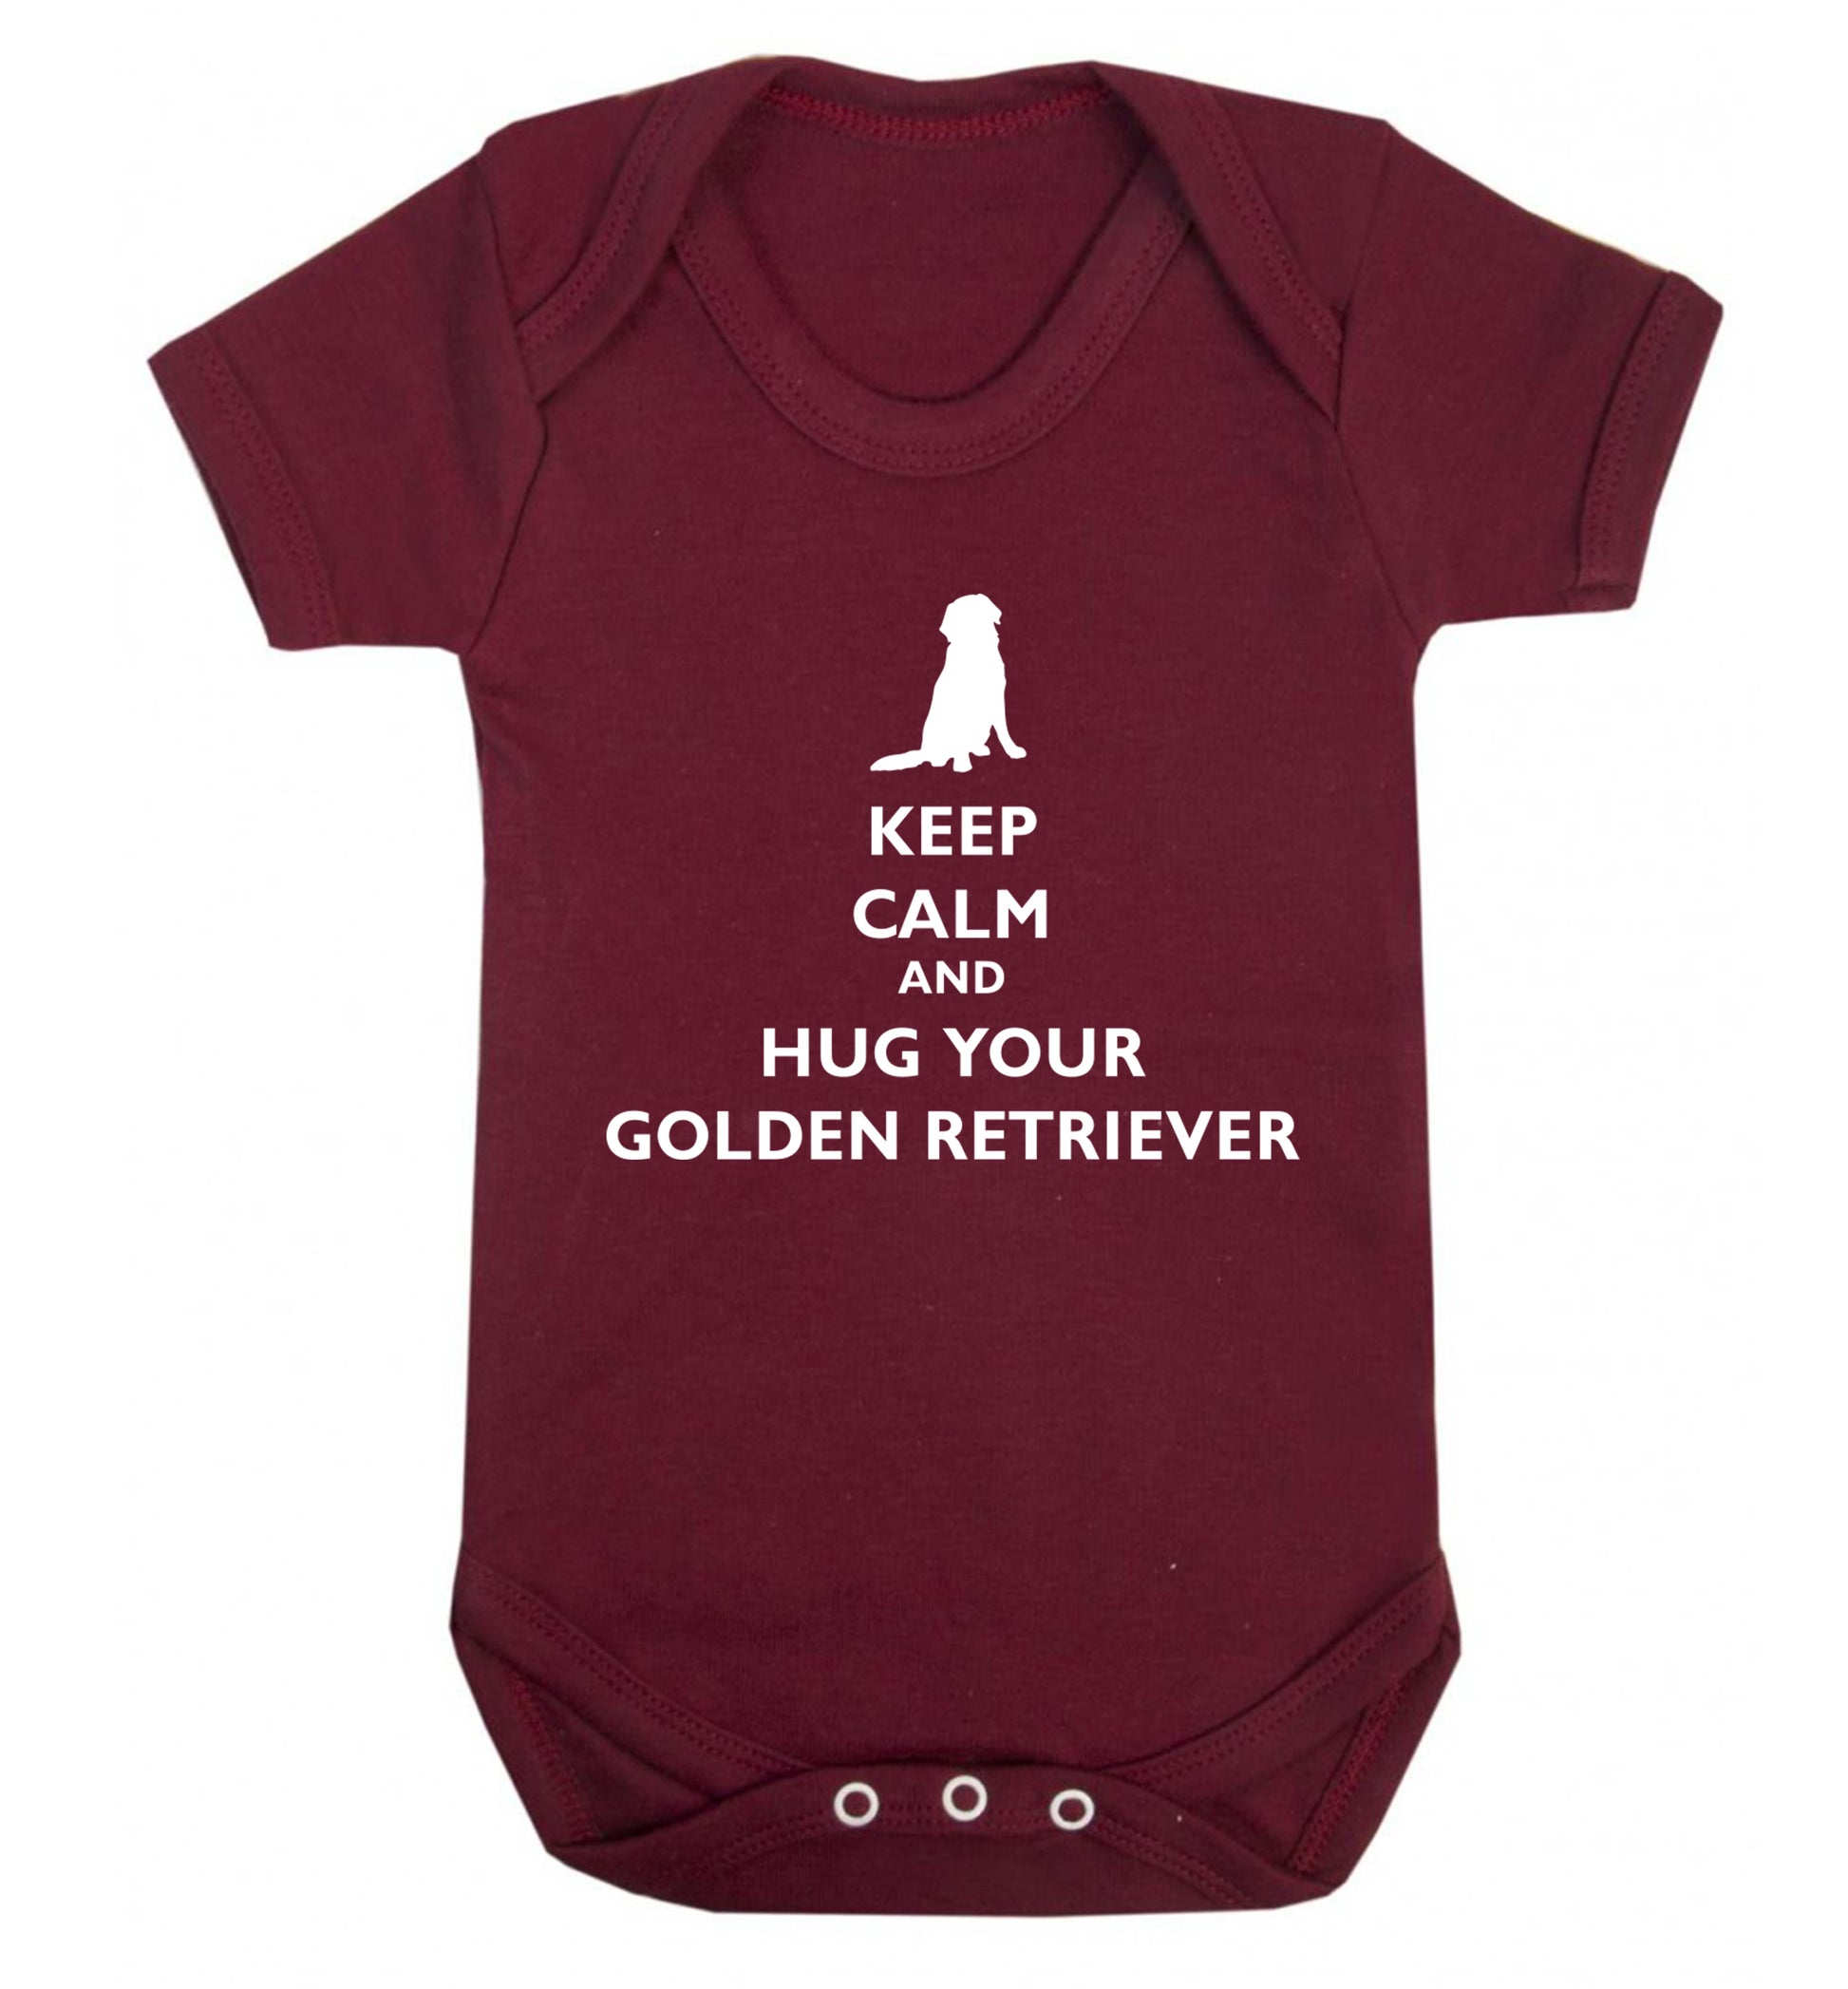 Keep calm and hug your golden retriever Baby Vest maroon 18-24 months